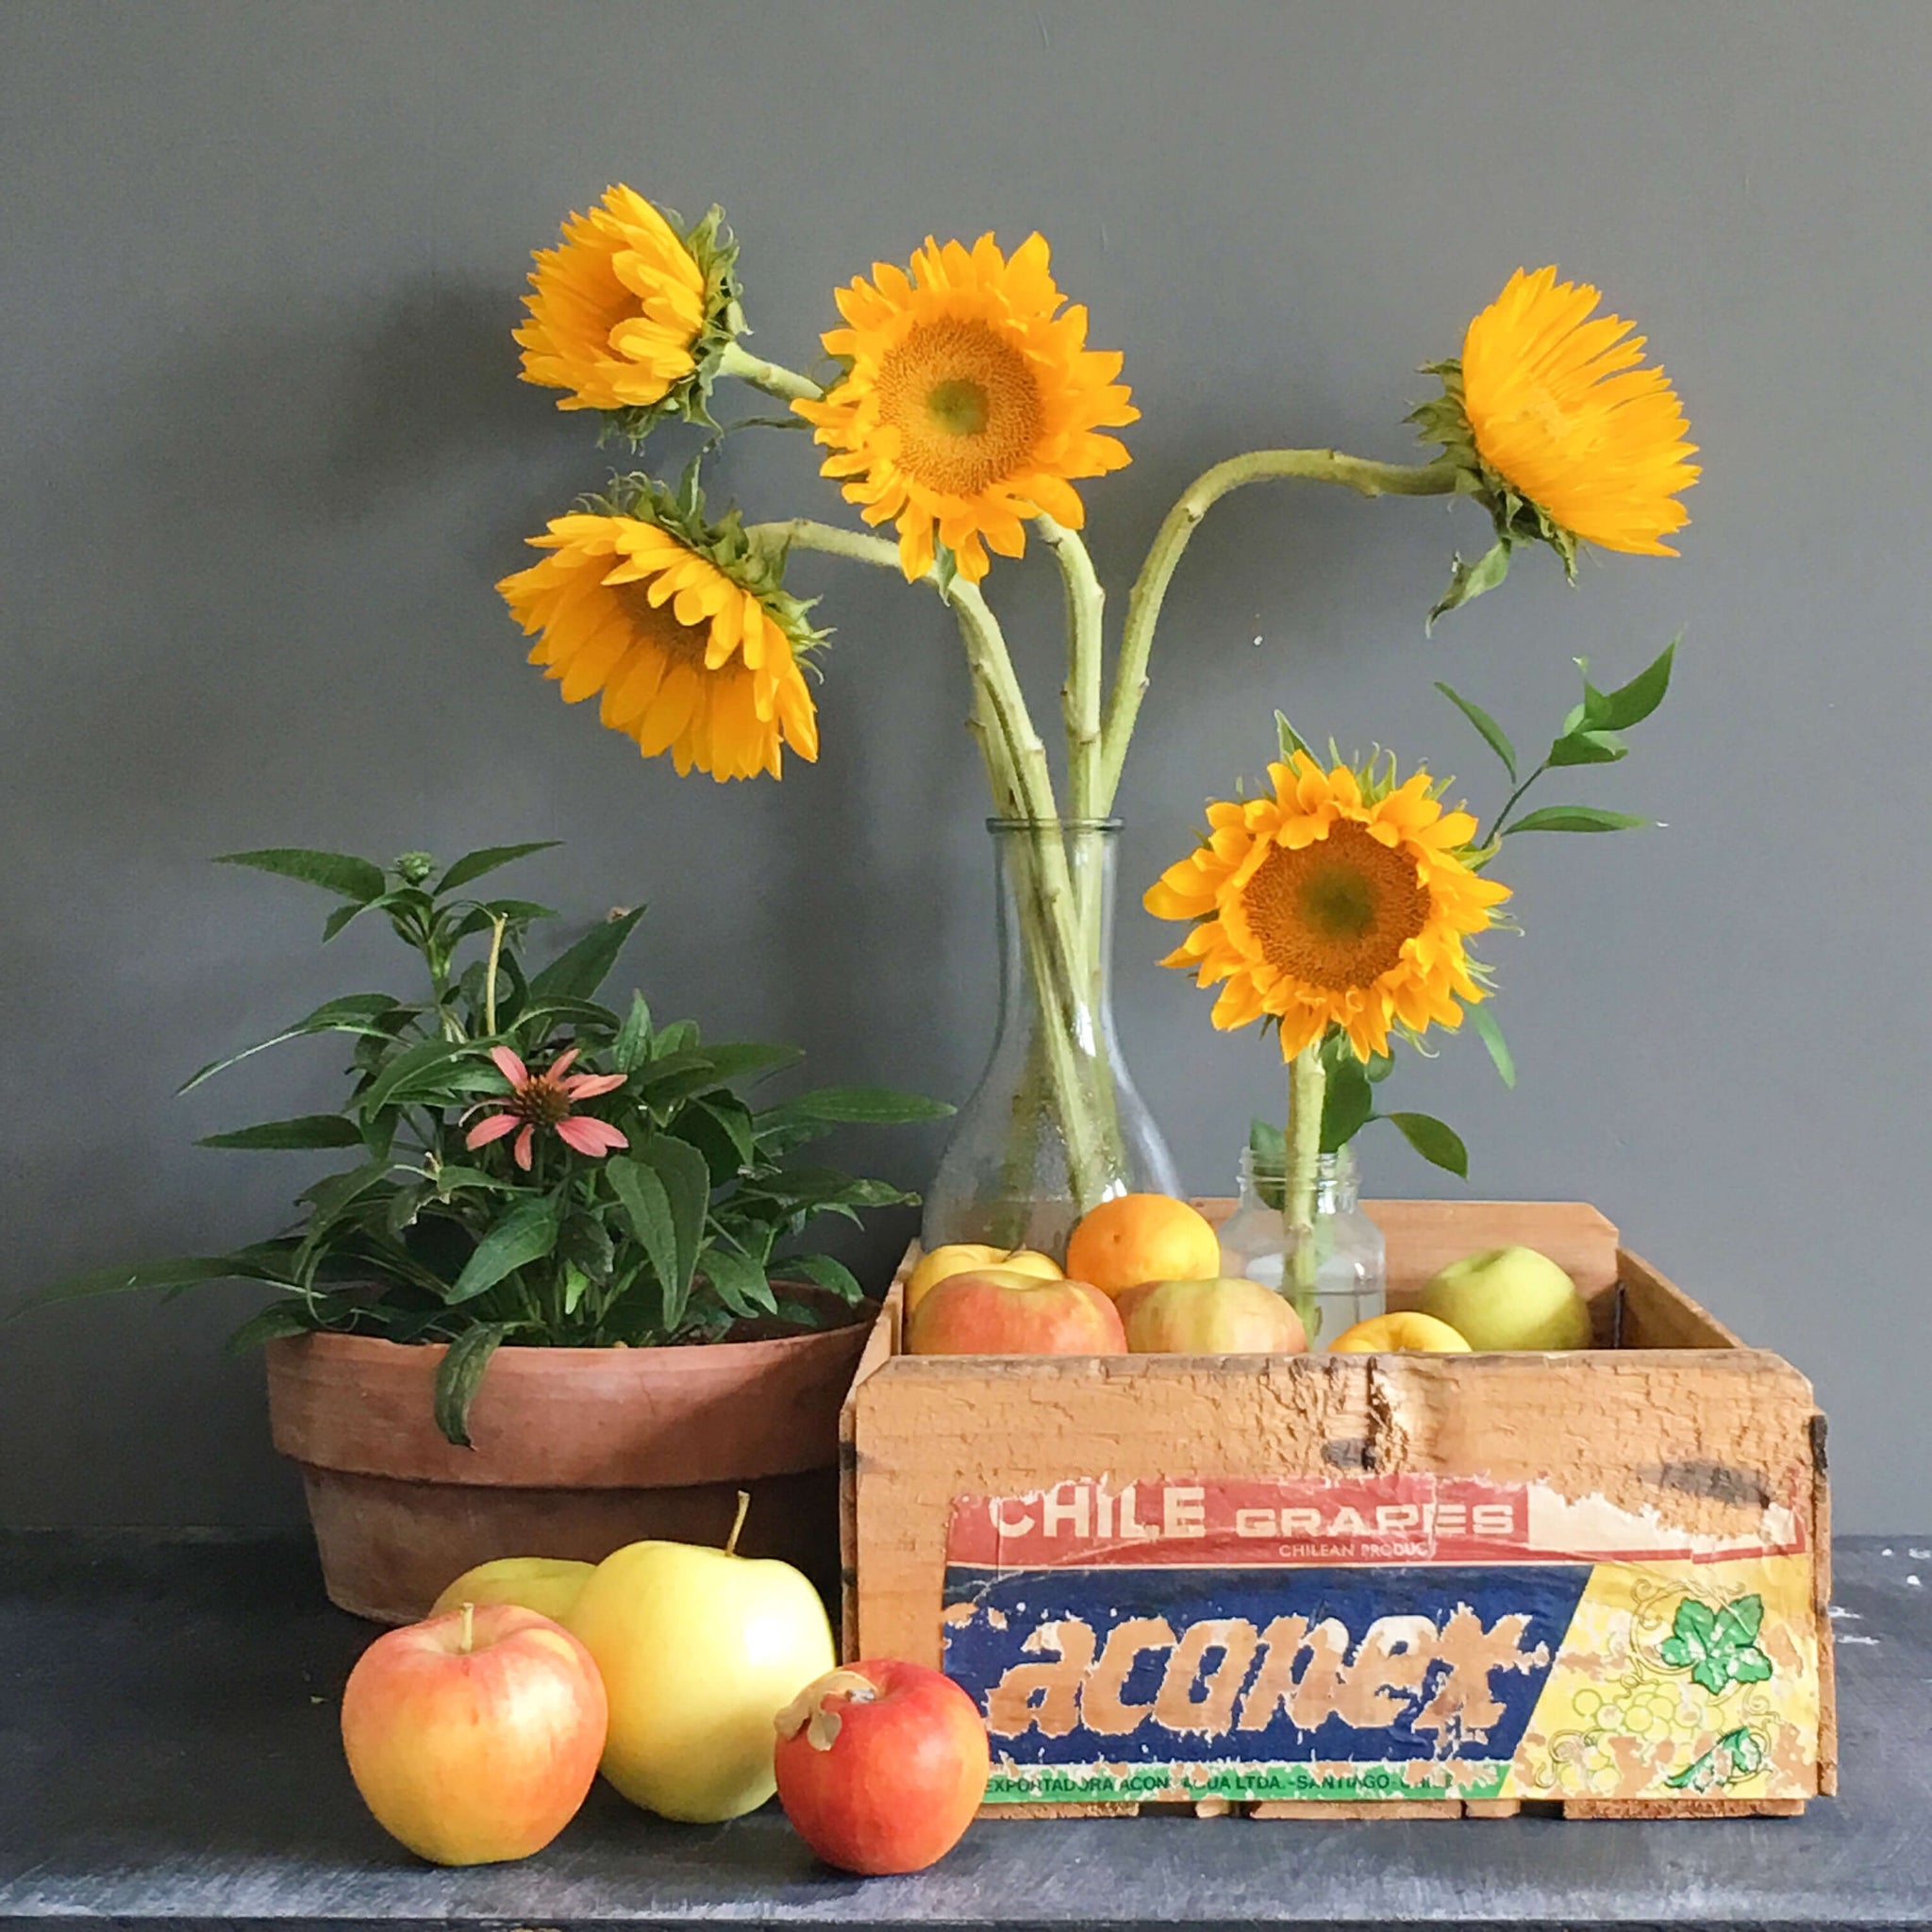 Vintage Wooden Fruit Crate - Aconex Grapes from Chile circa 1970's